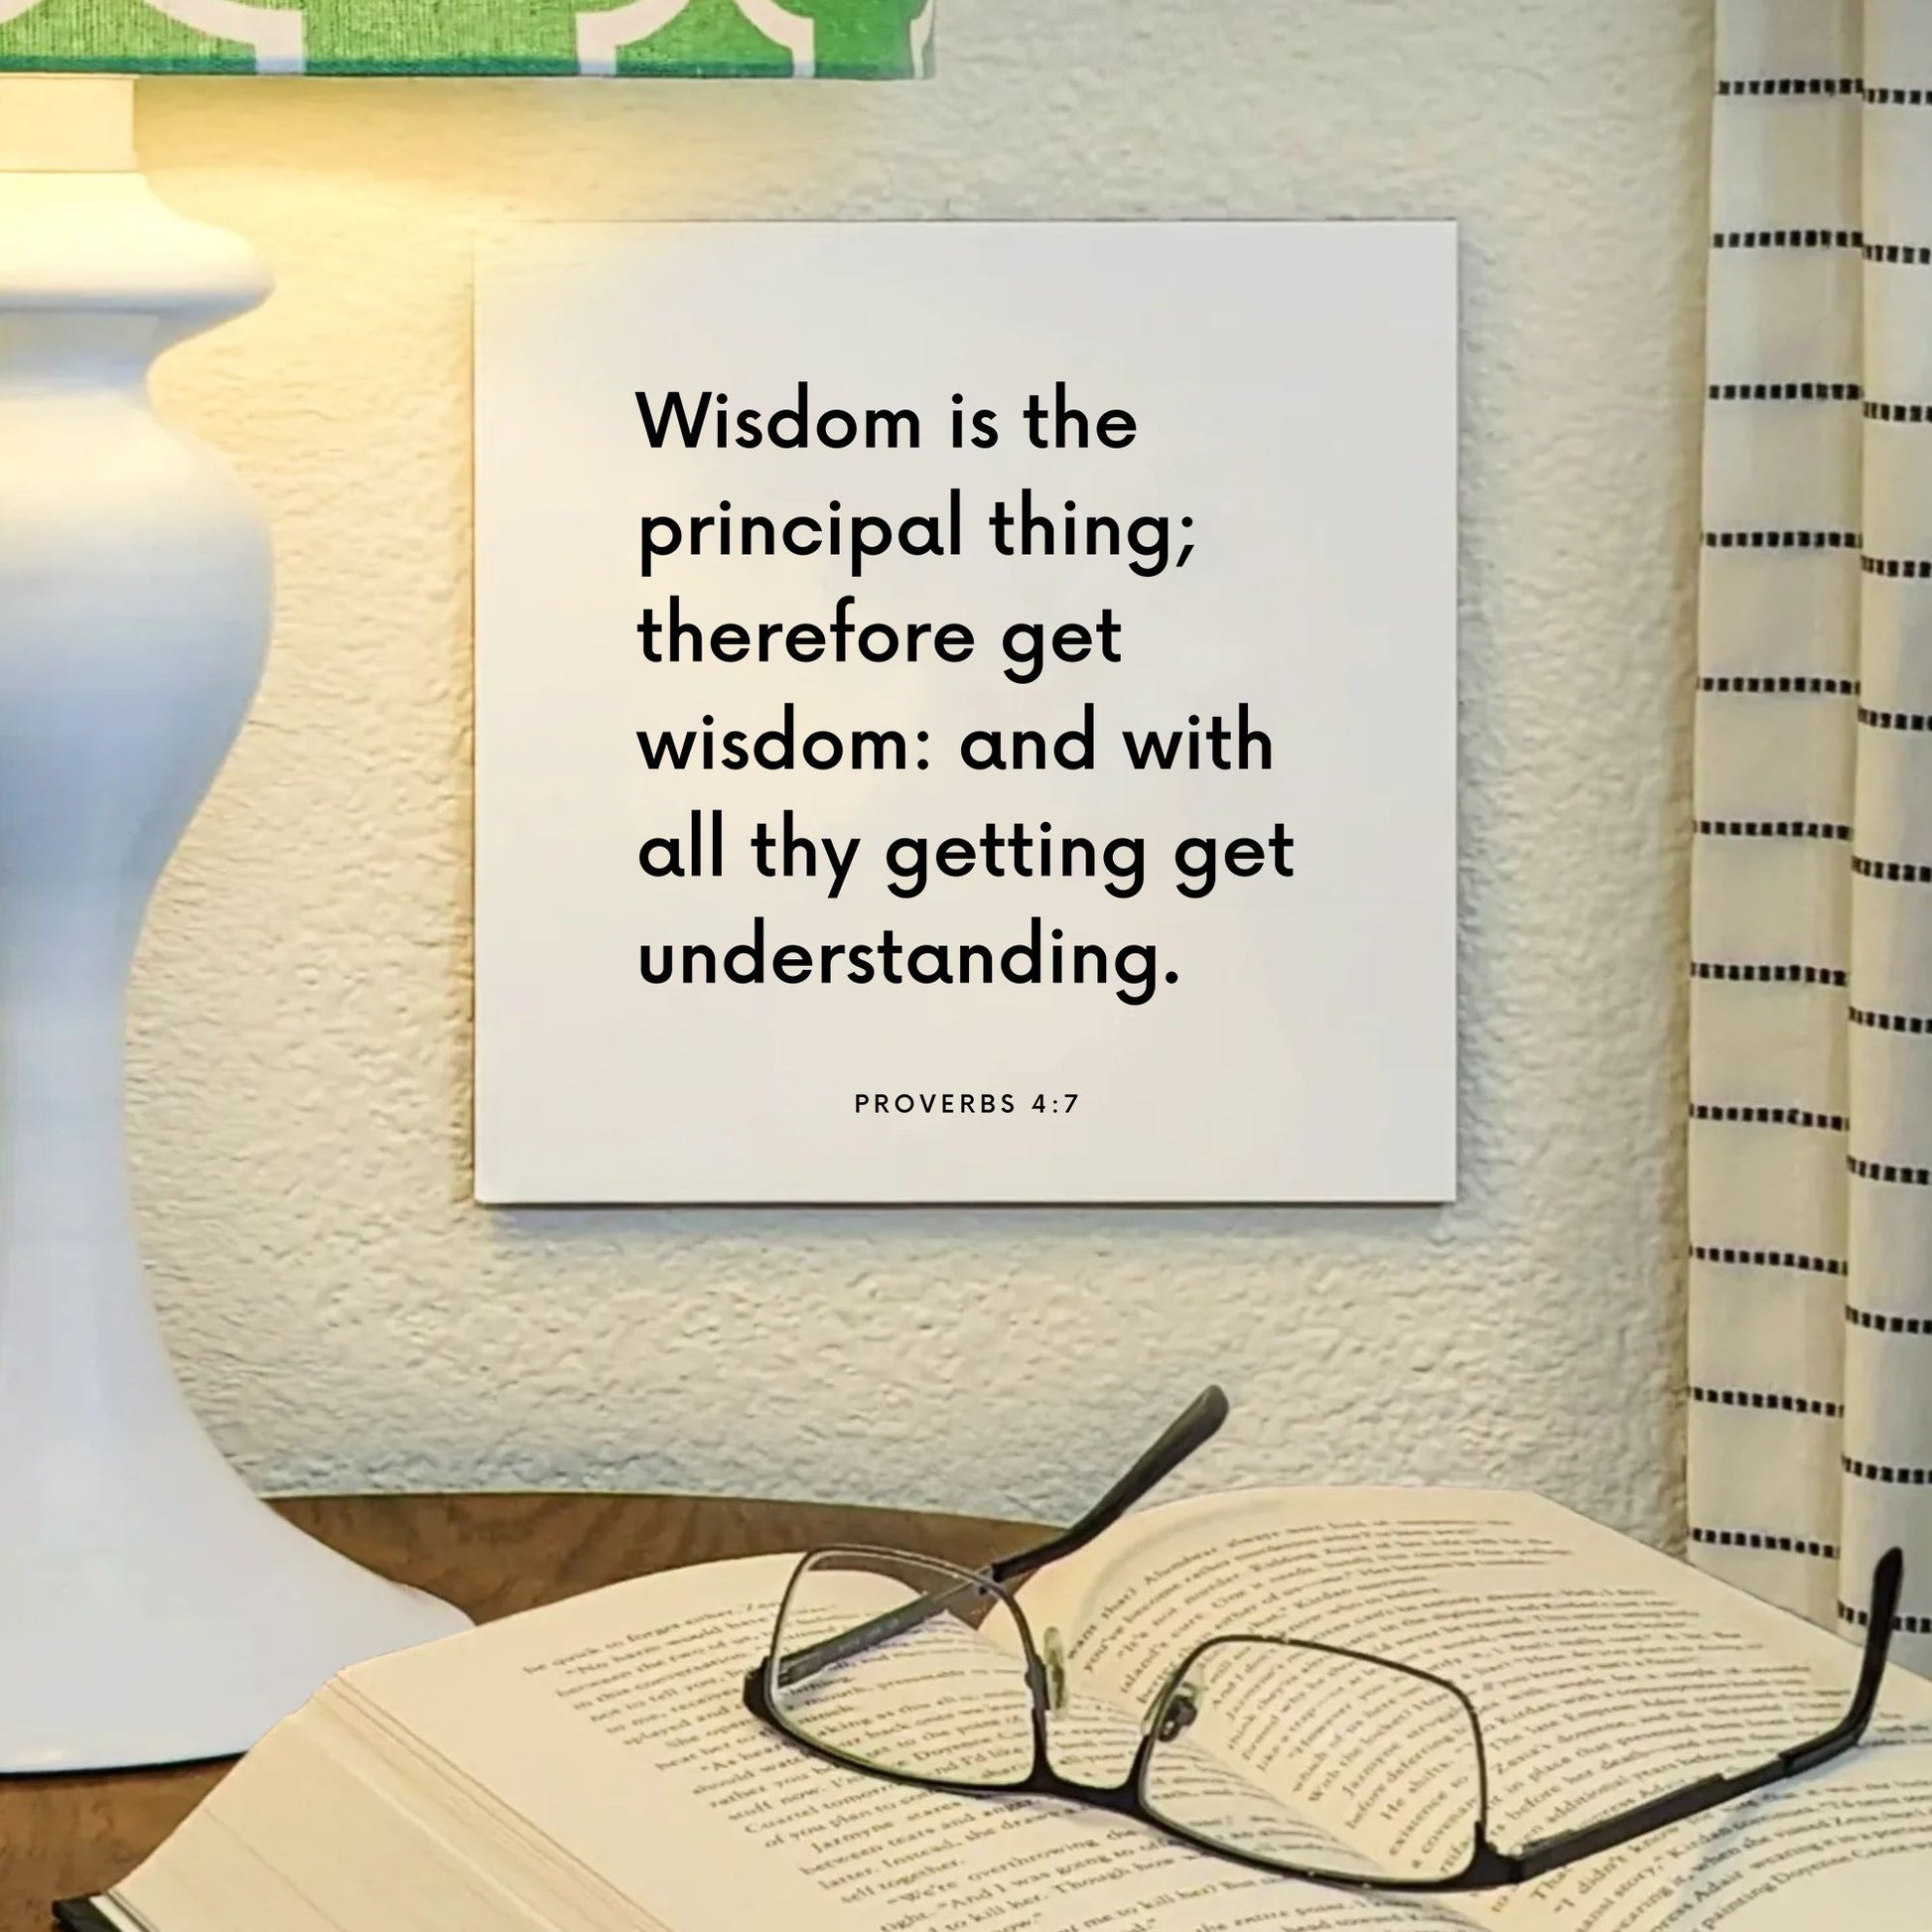 Lamp mouting of the scripture tile for Proverbs 4:7 - "Wisdom is the principal thing; therefore get wisdom"